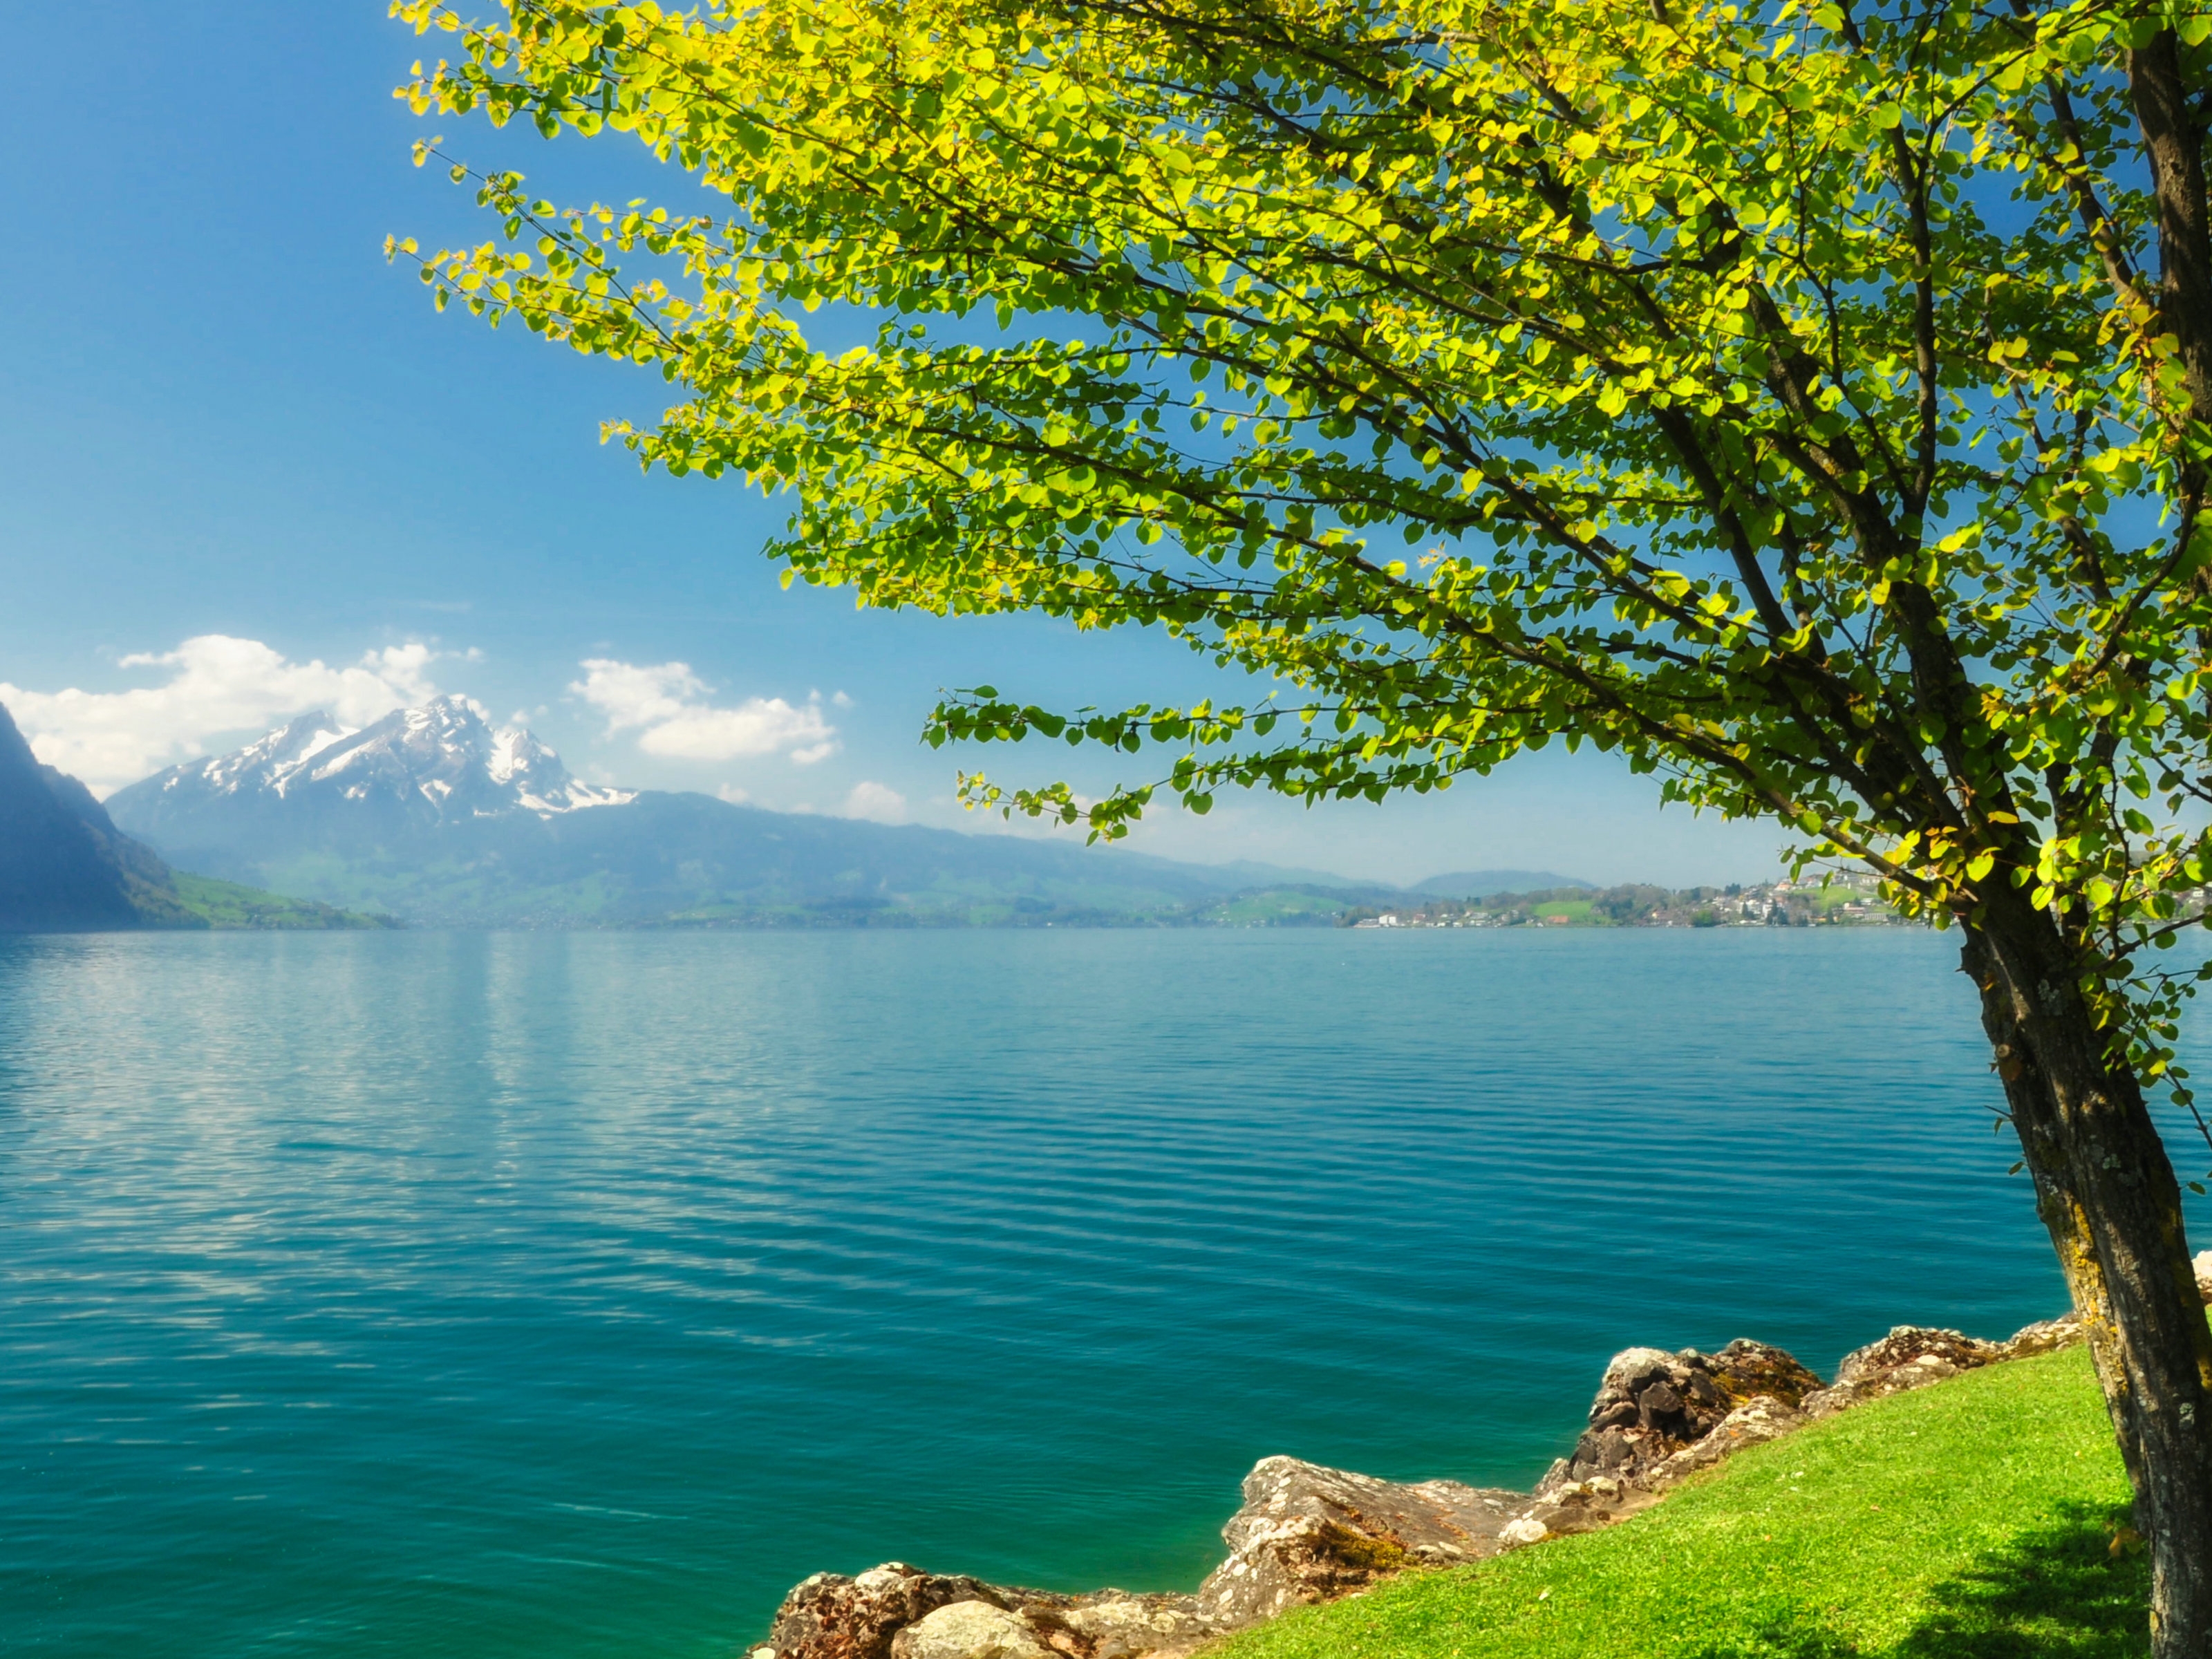 Image: Tree, foliage, blue lake, water, mountains, stones, sky, clouds